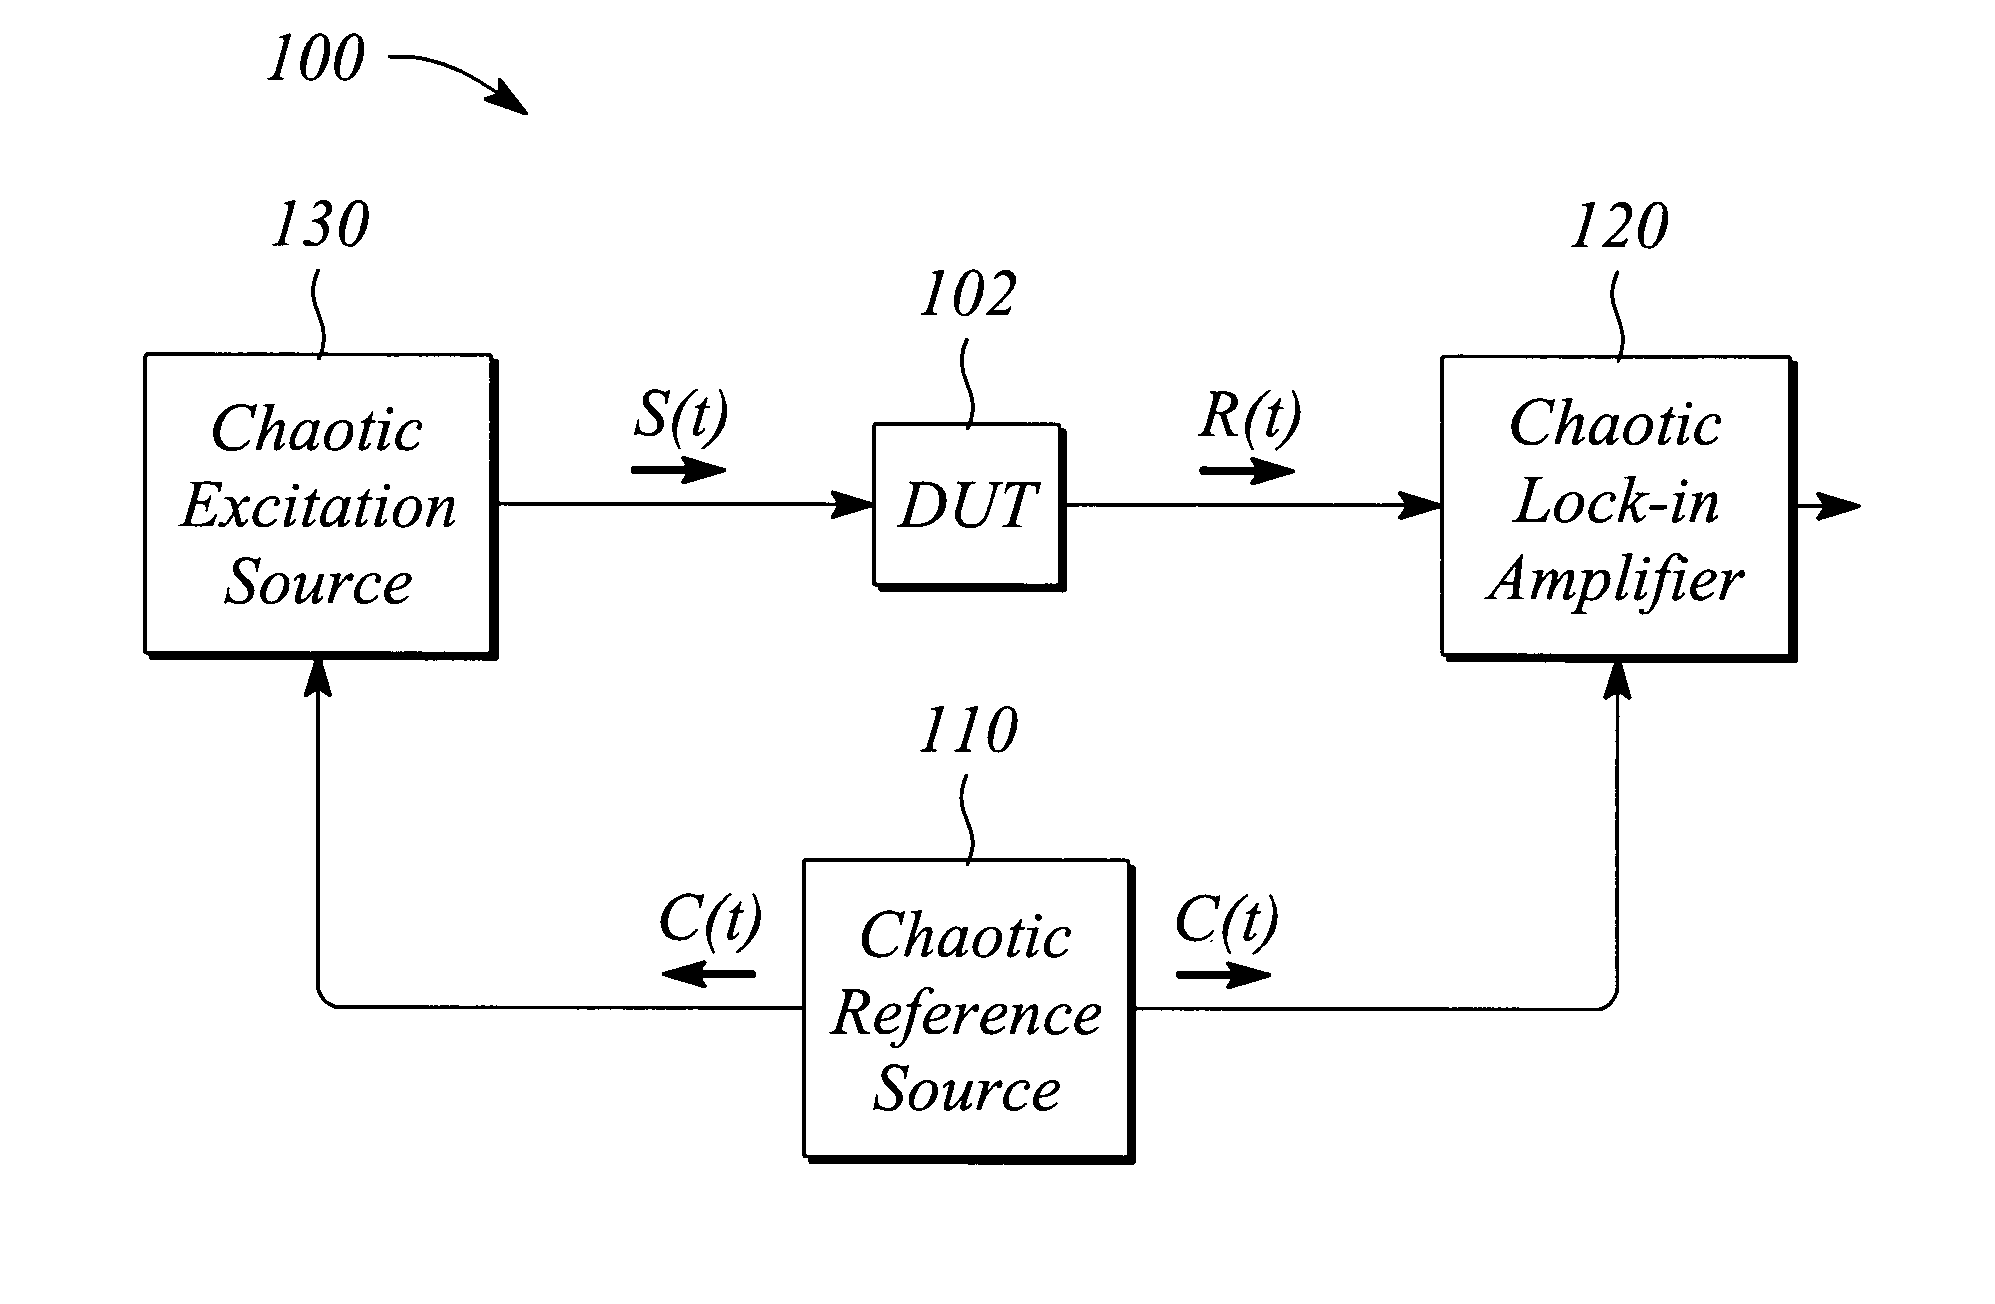 Stimulation-response measurement system and method using a chaotic lock-in amplifier